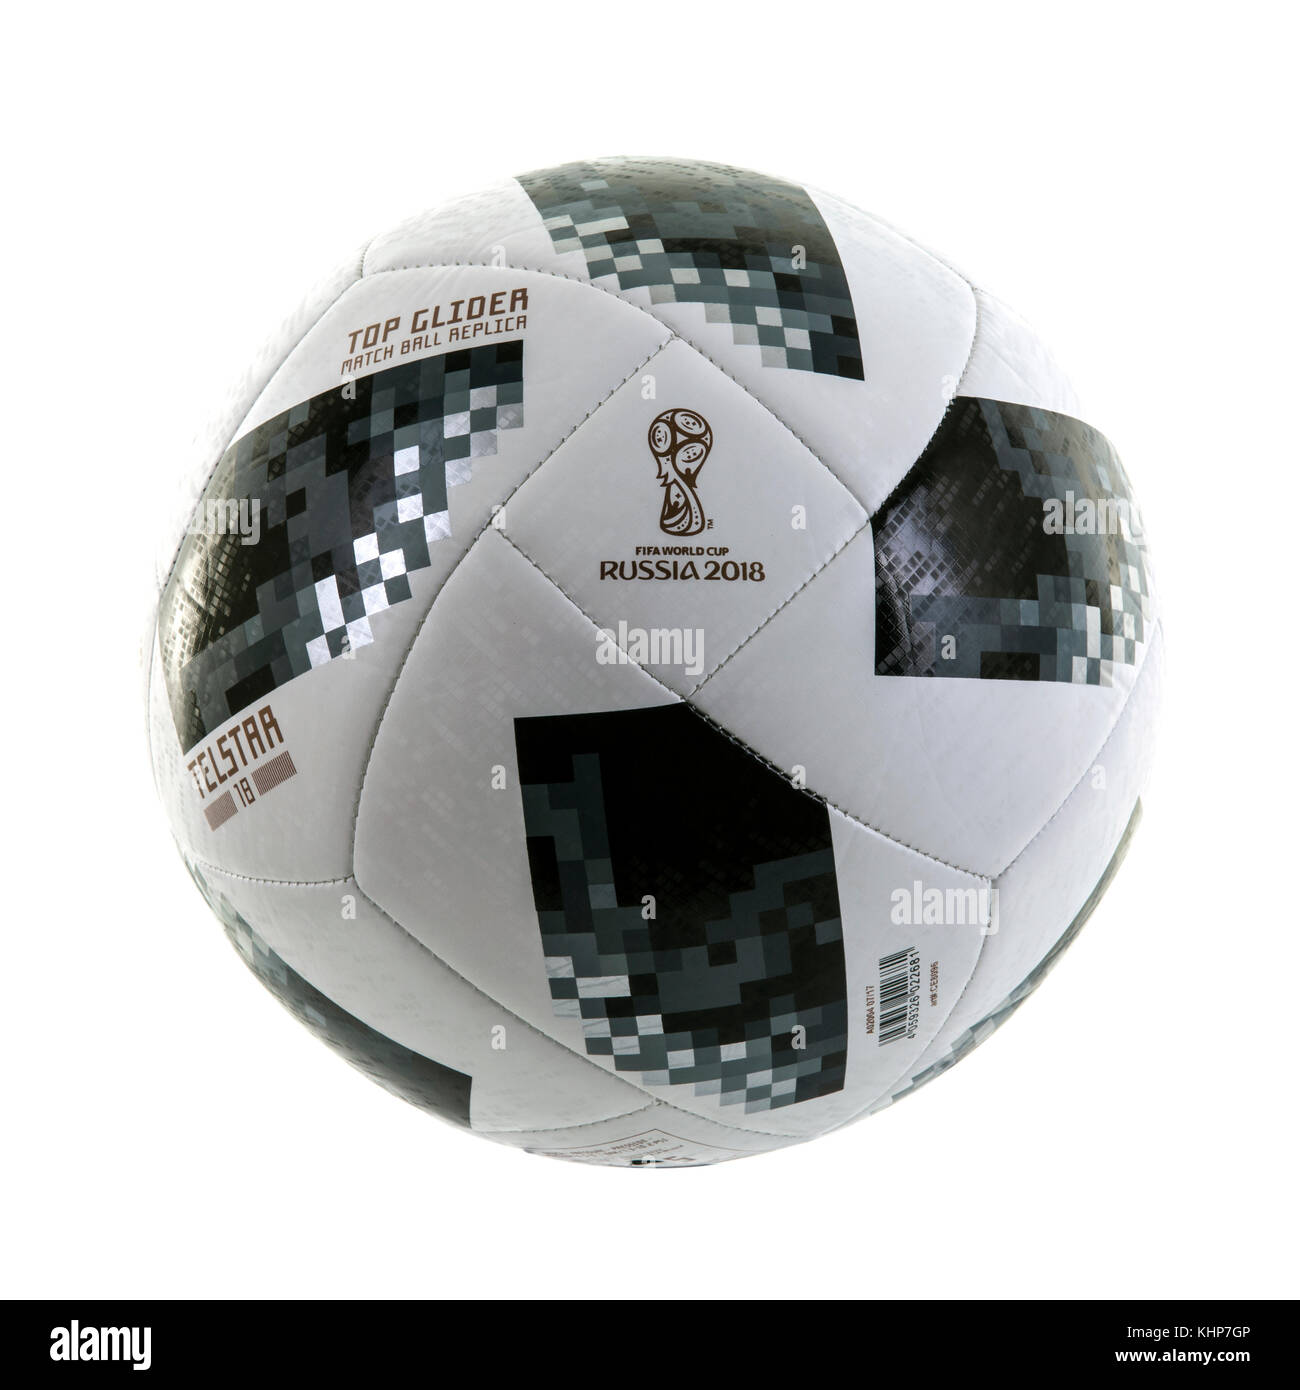 SWINDON, UK - NOVEMBER 18, 2017: Adidas Telstar Top Glider World Cup 2018 Football, The Official Matchball for the 2018 Russia World Cup Stock Photo